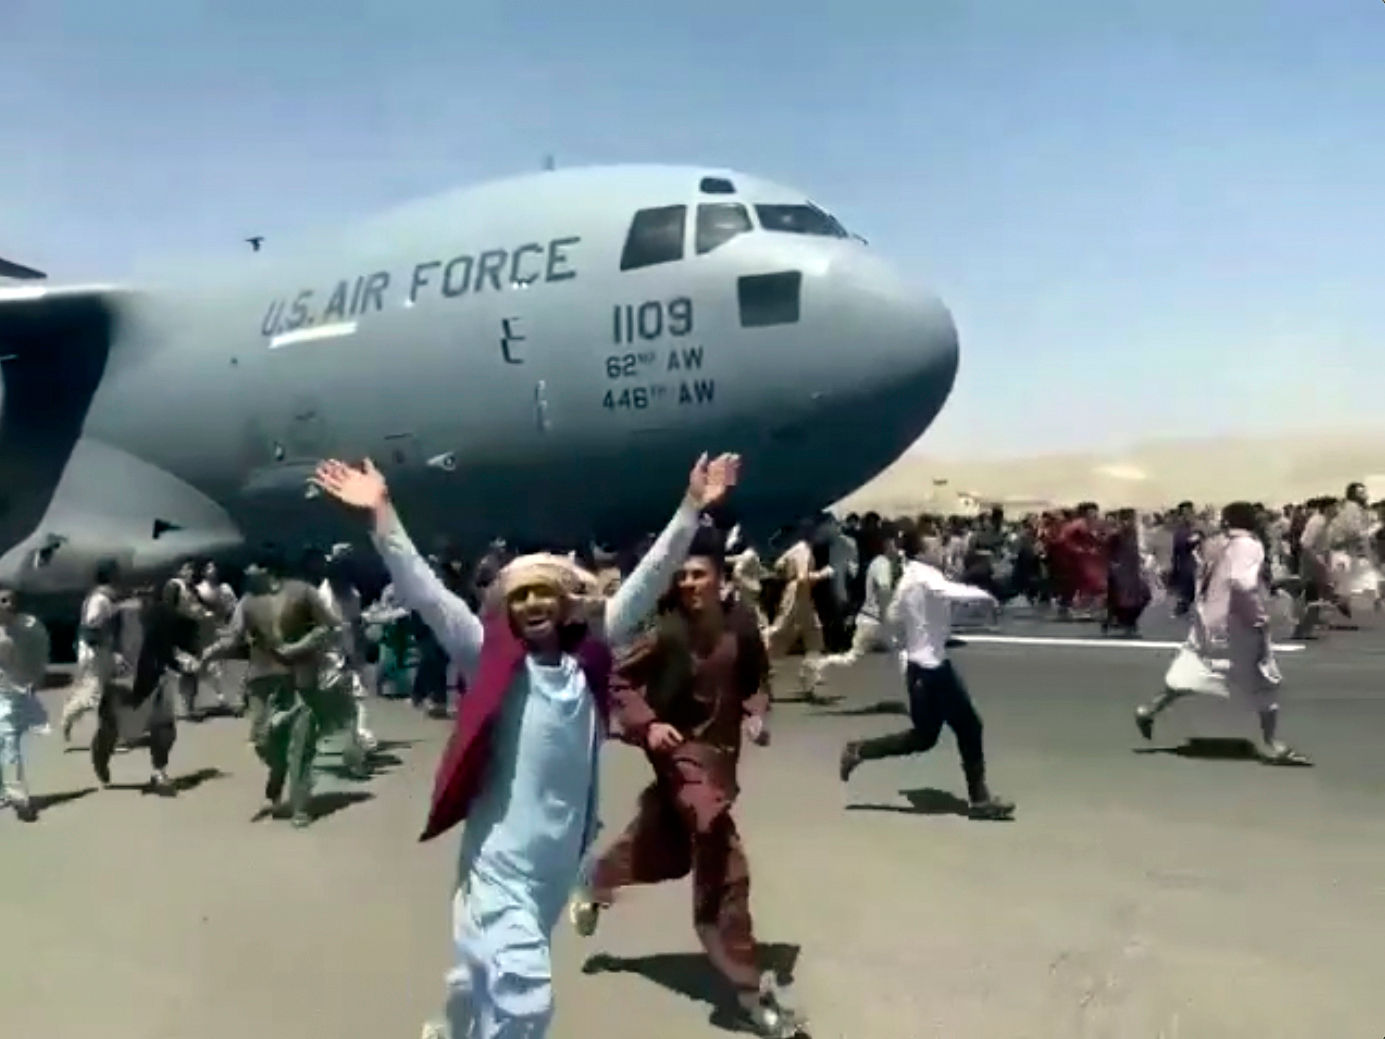 Taliban says Afghans ‘no longer allowed’ to go to Kabul airport